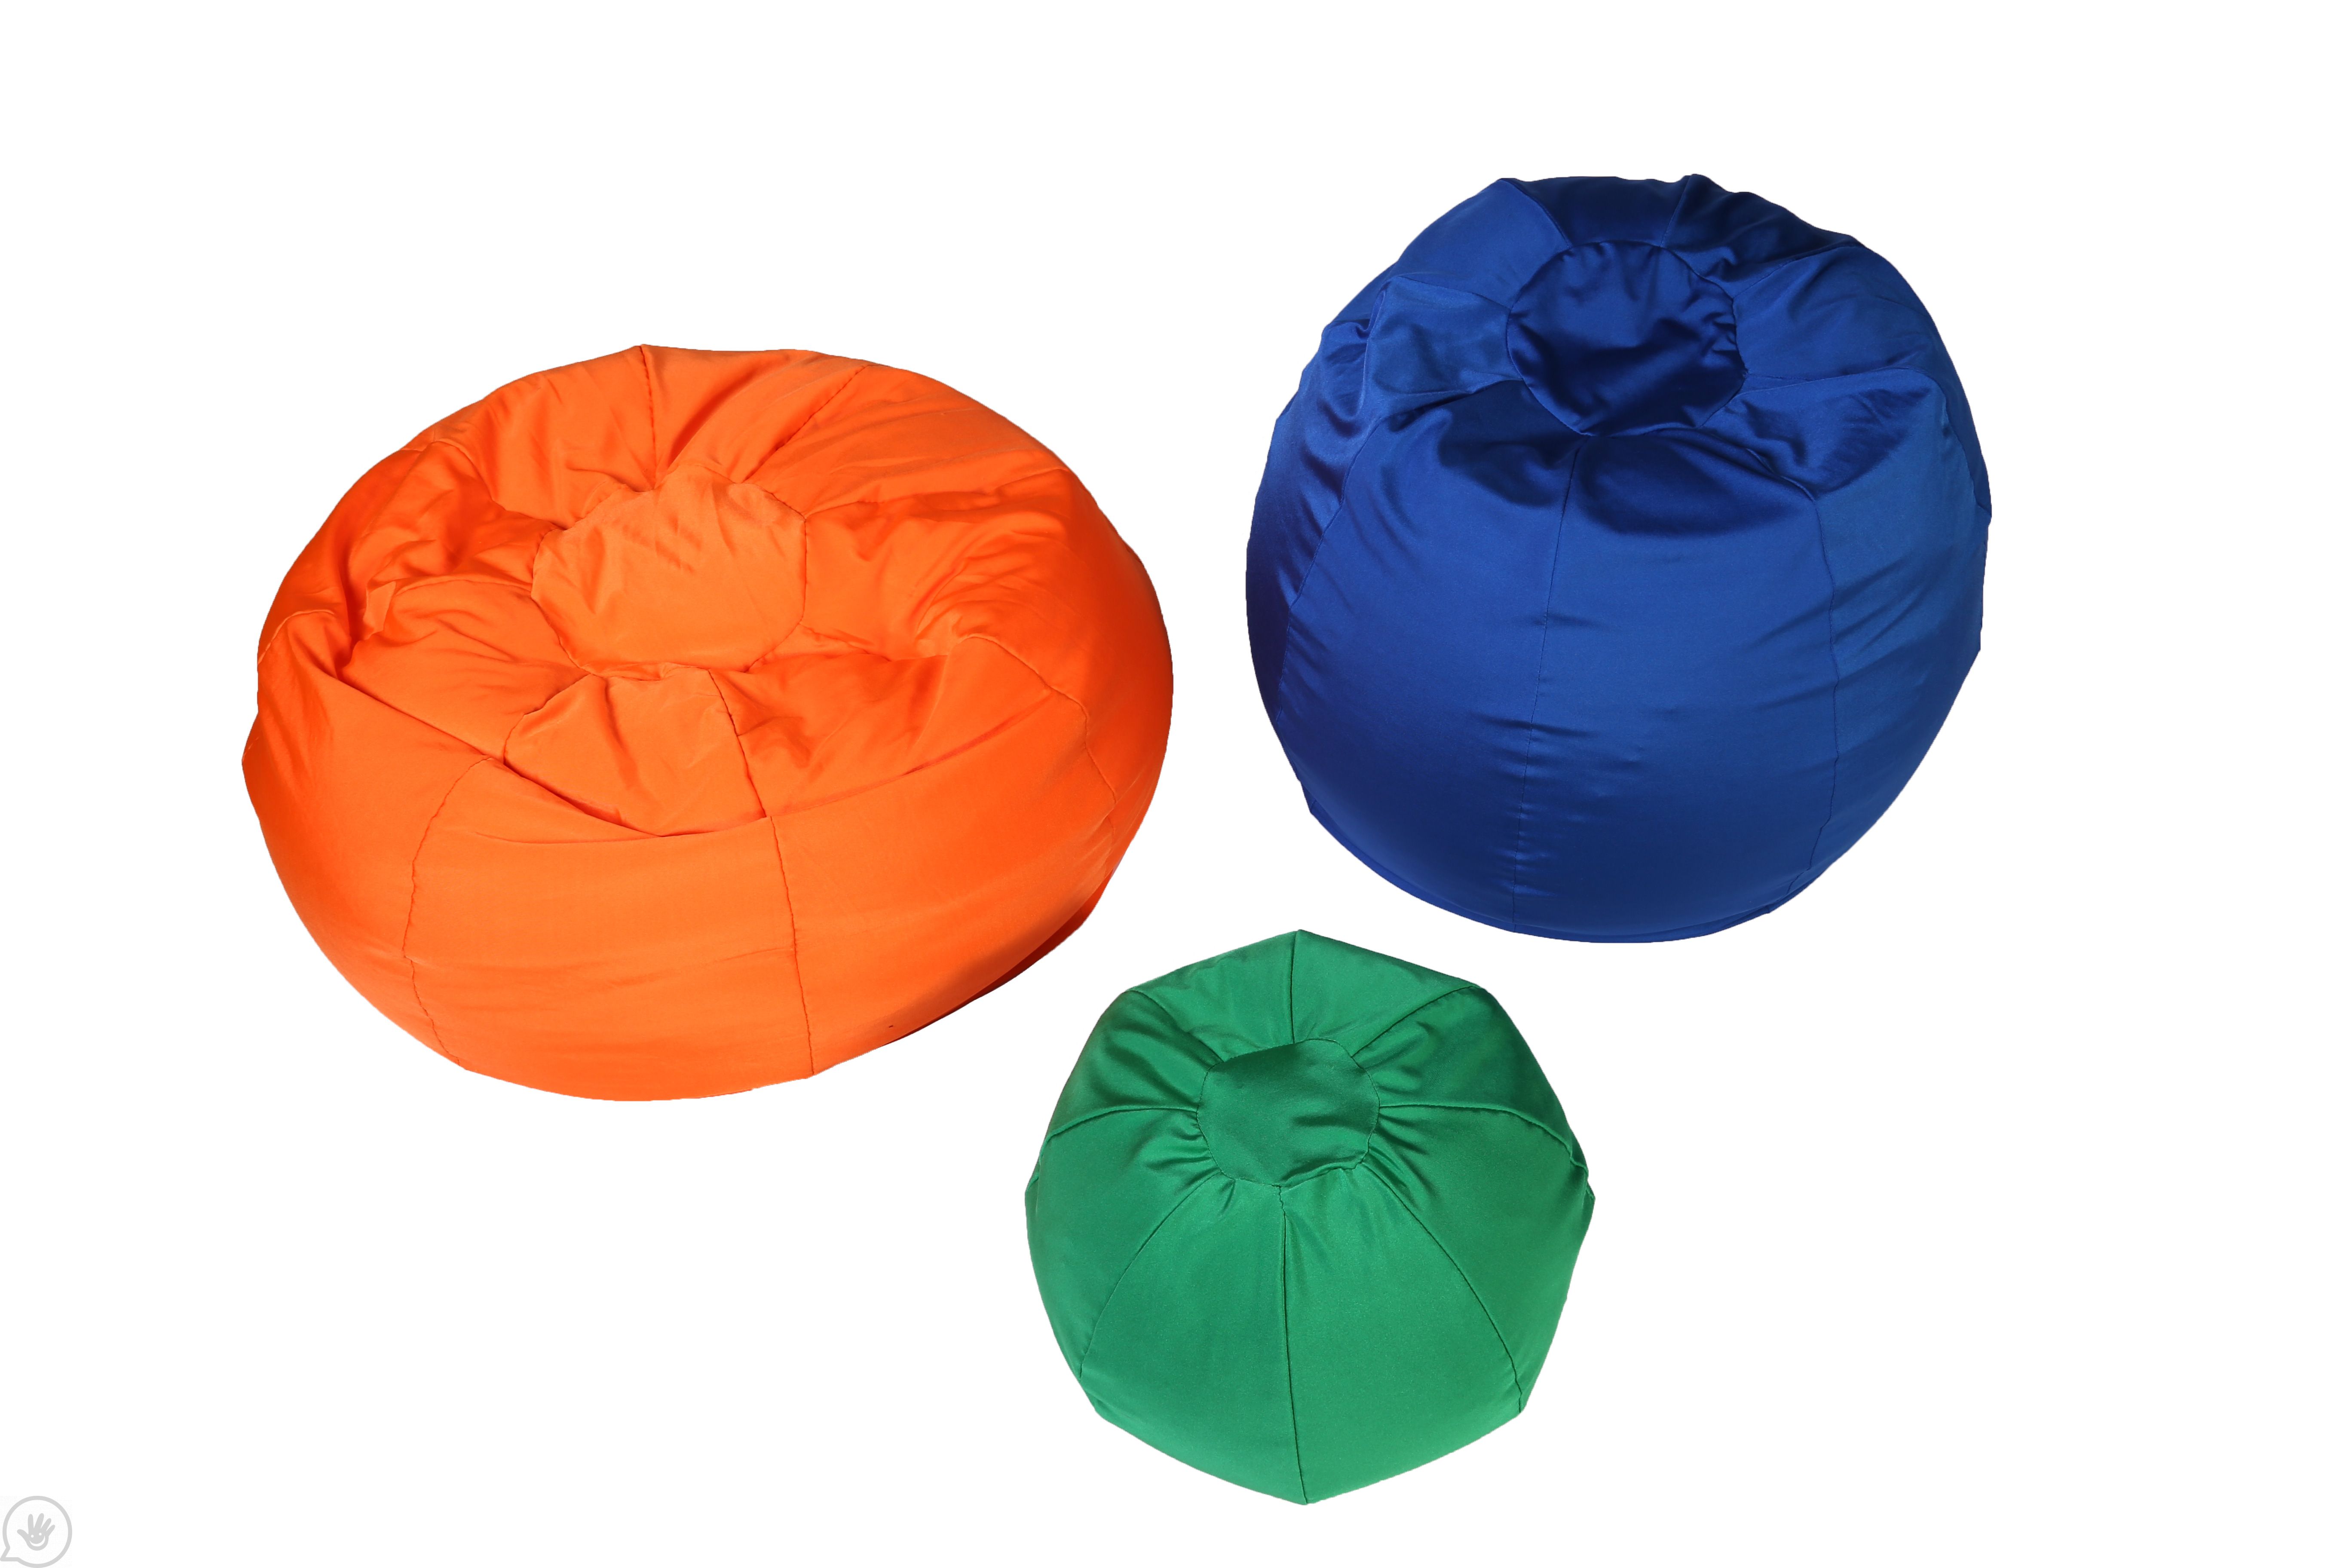 Sofa Sack - Plush Ultra Soft Bean Bags Chairs for Kids, Teens, Adults -  Memory Foam Beanless Bag Chair with Microsuede Cover - Foam Unfilled -  Walmart.com